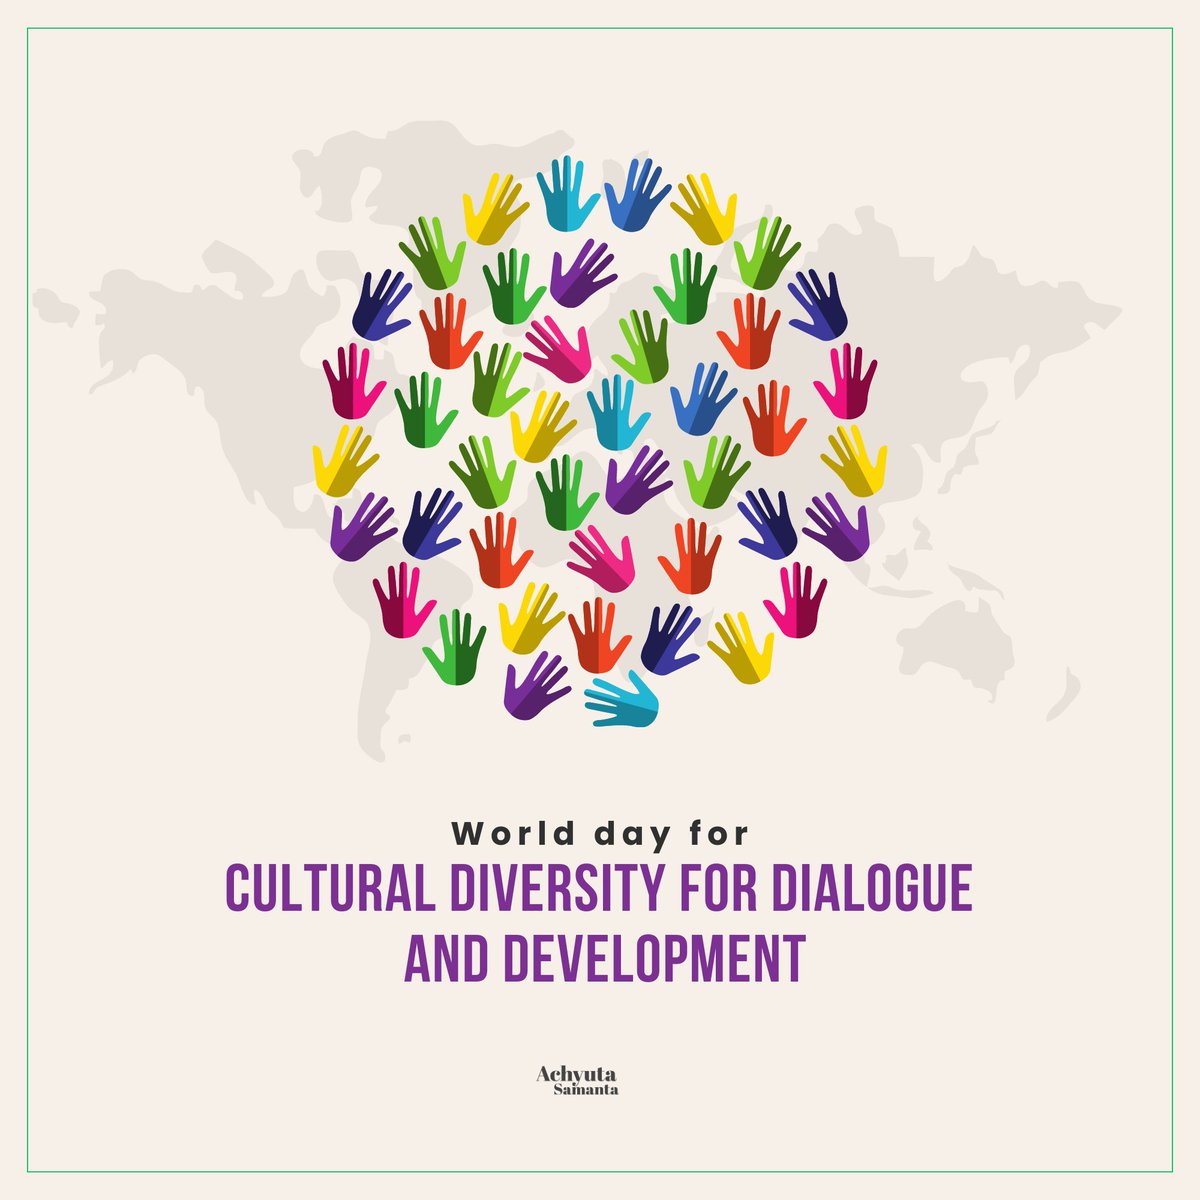 On World Day for Cultural Diversity for Dialogue and Development, let's celebrate the rich tapestry of cultures that unite us. Embracing diversity fosters understanding, dialogue, and progress. Proud to see KIIT and KISS as vibrant examples of cultural harmony and development.